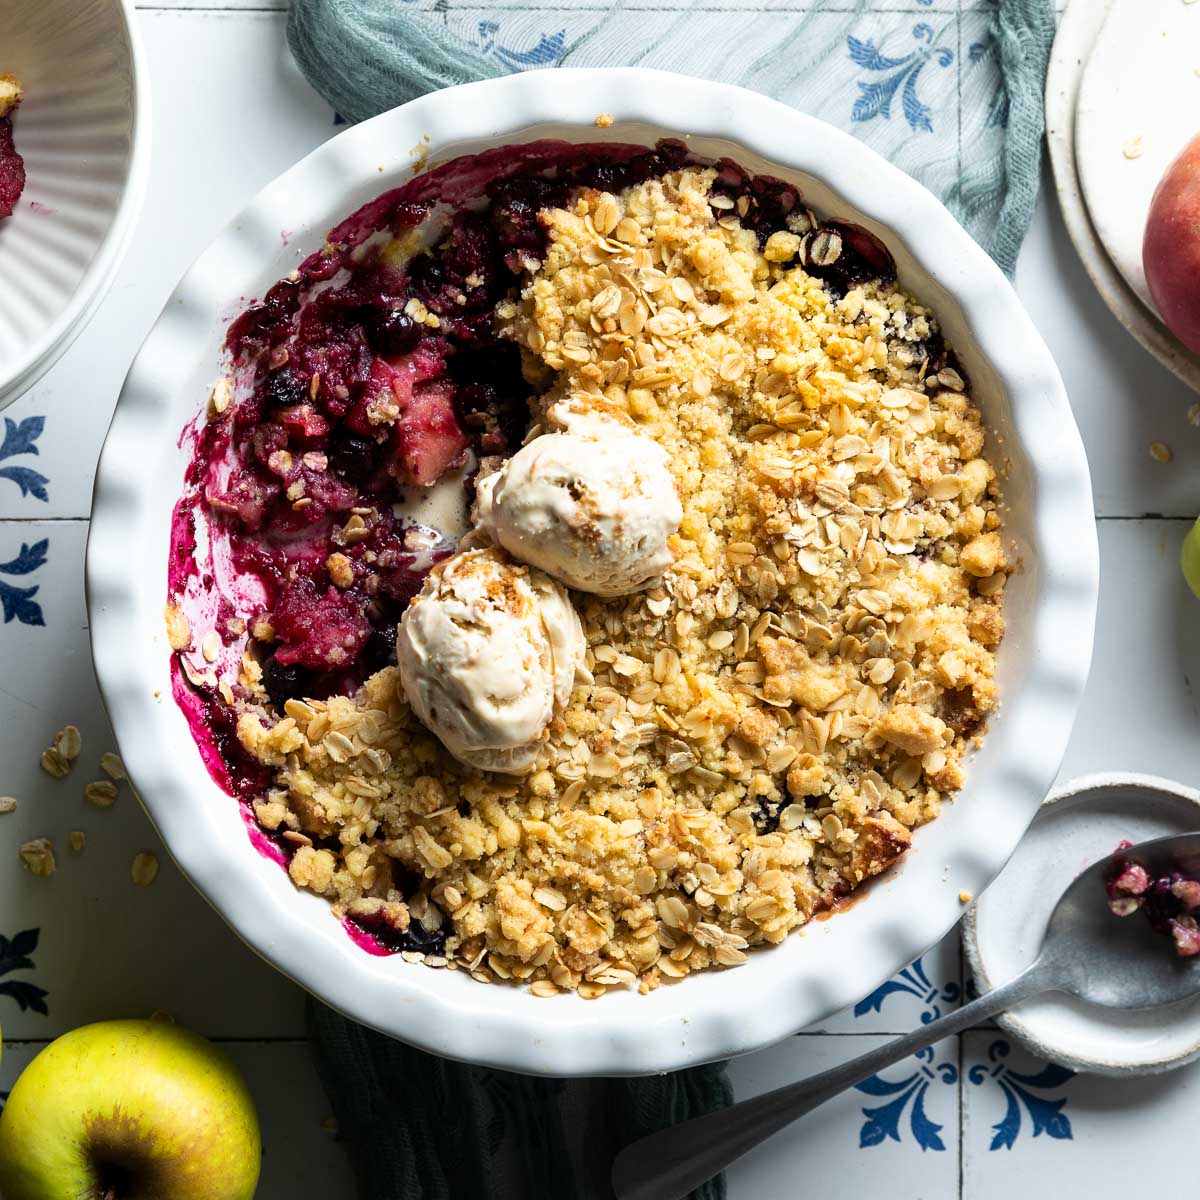 blueberry and apple crumble in white baking dish served with two scoops of ice cream.